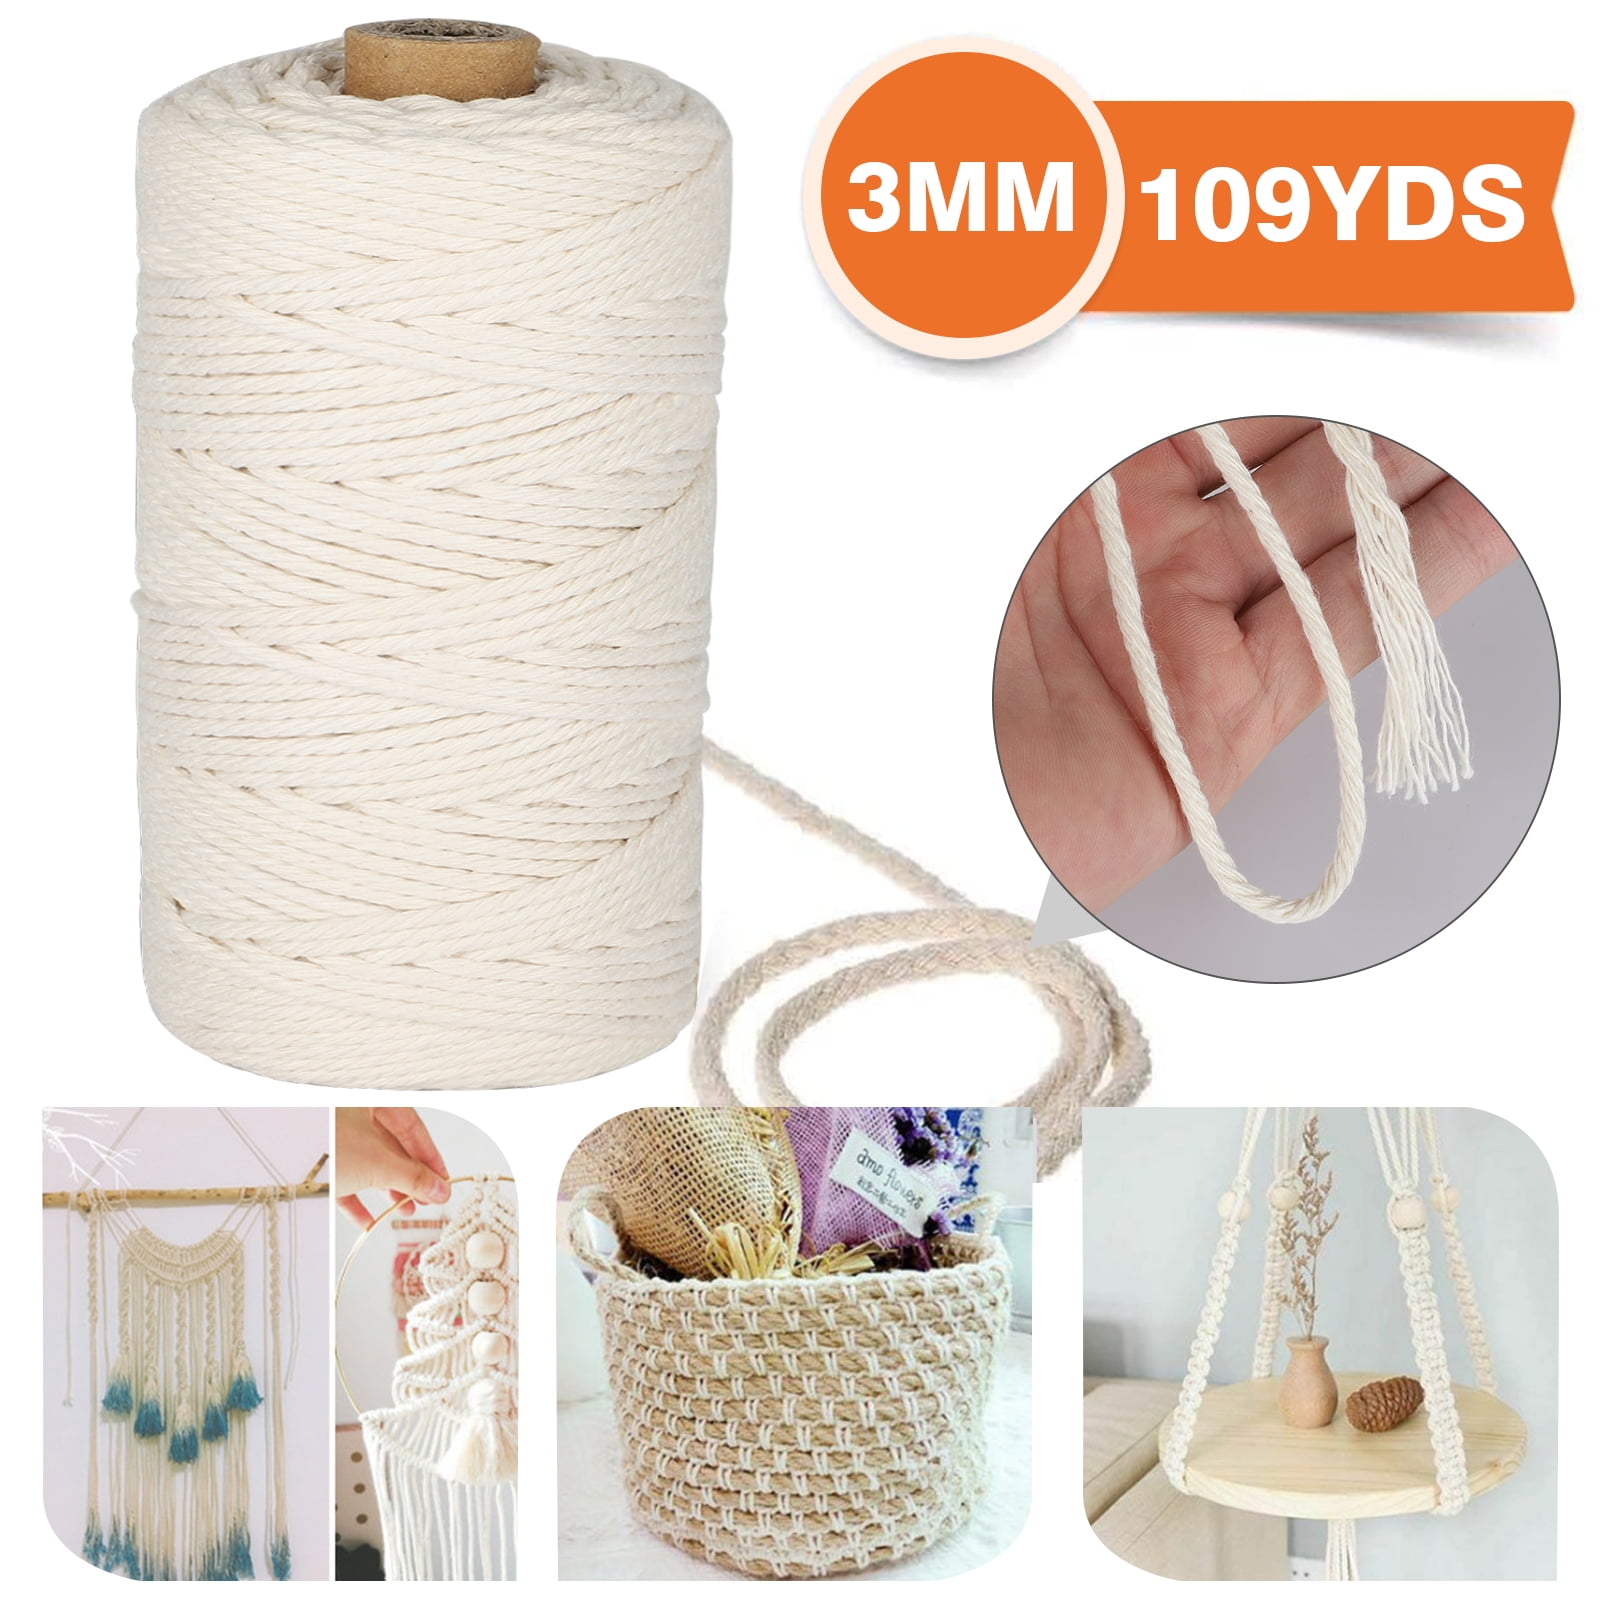 Macrame Cord 3mm x 328yd Beige 100% Natural Cotton Macrame Rope 4 Strand Twisted Cotton Cord for DIY Crafts Knitting Plant Hangers Wedding Decor 